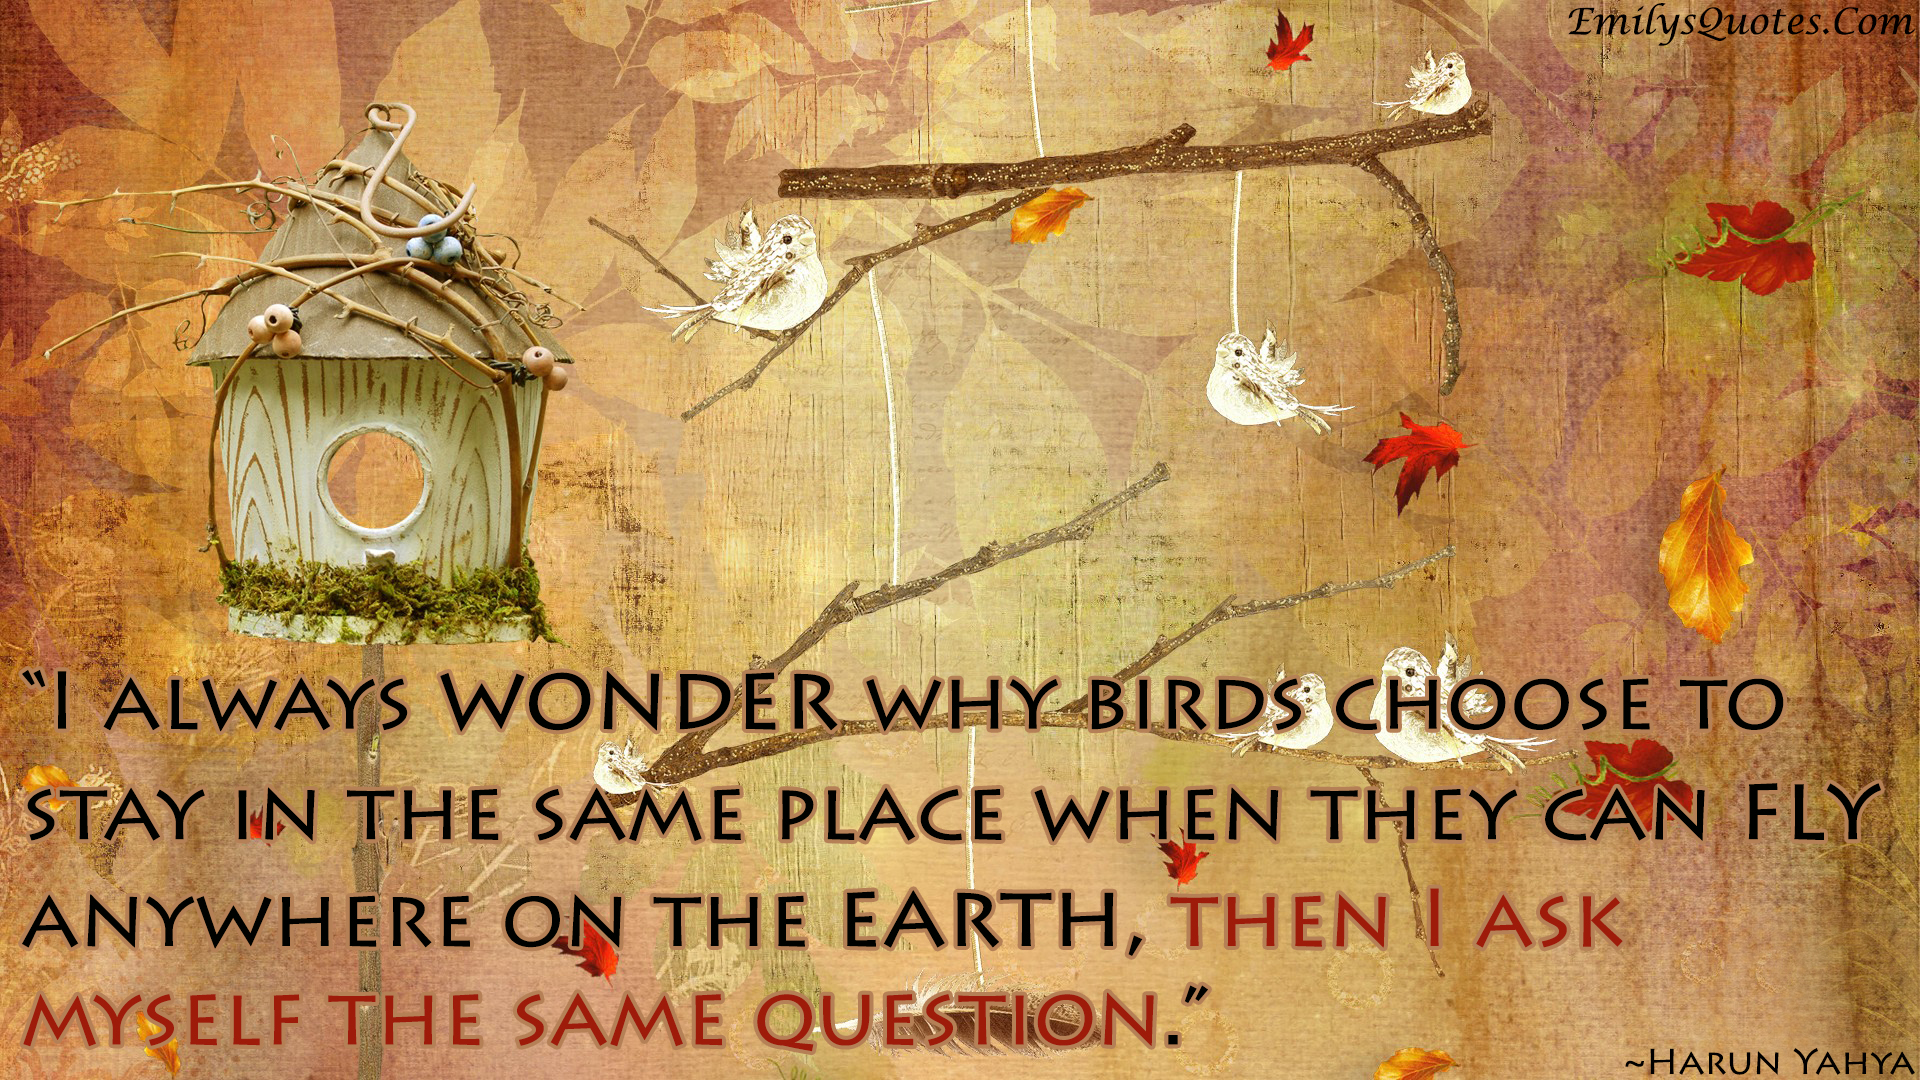 I always wonder why birds choose to stay in the same place when they can fly anywhere on the earth, then I ask myself the same question